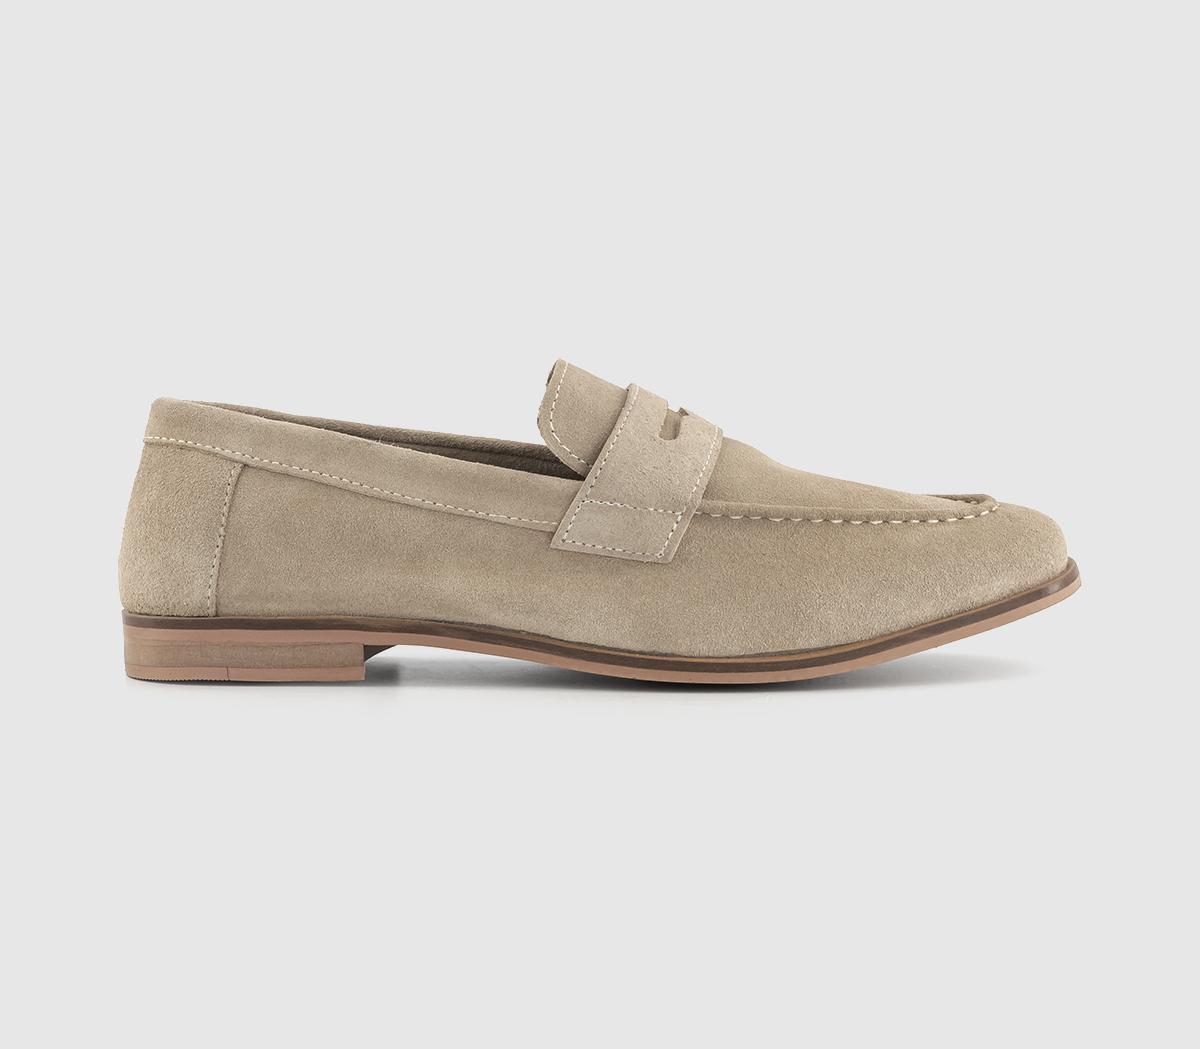 OFFICEColbert 2 Saddle LoaferStone Suede